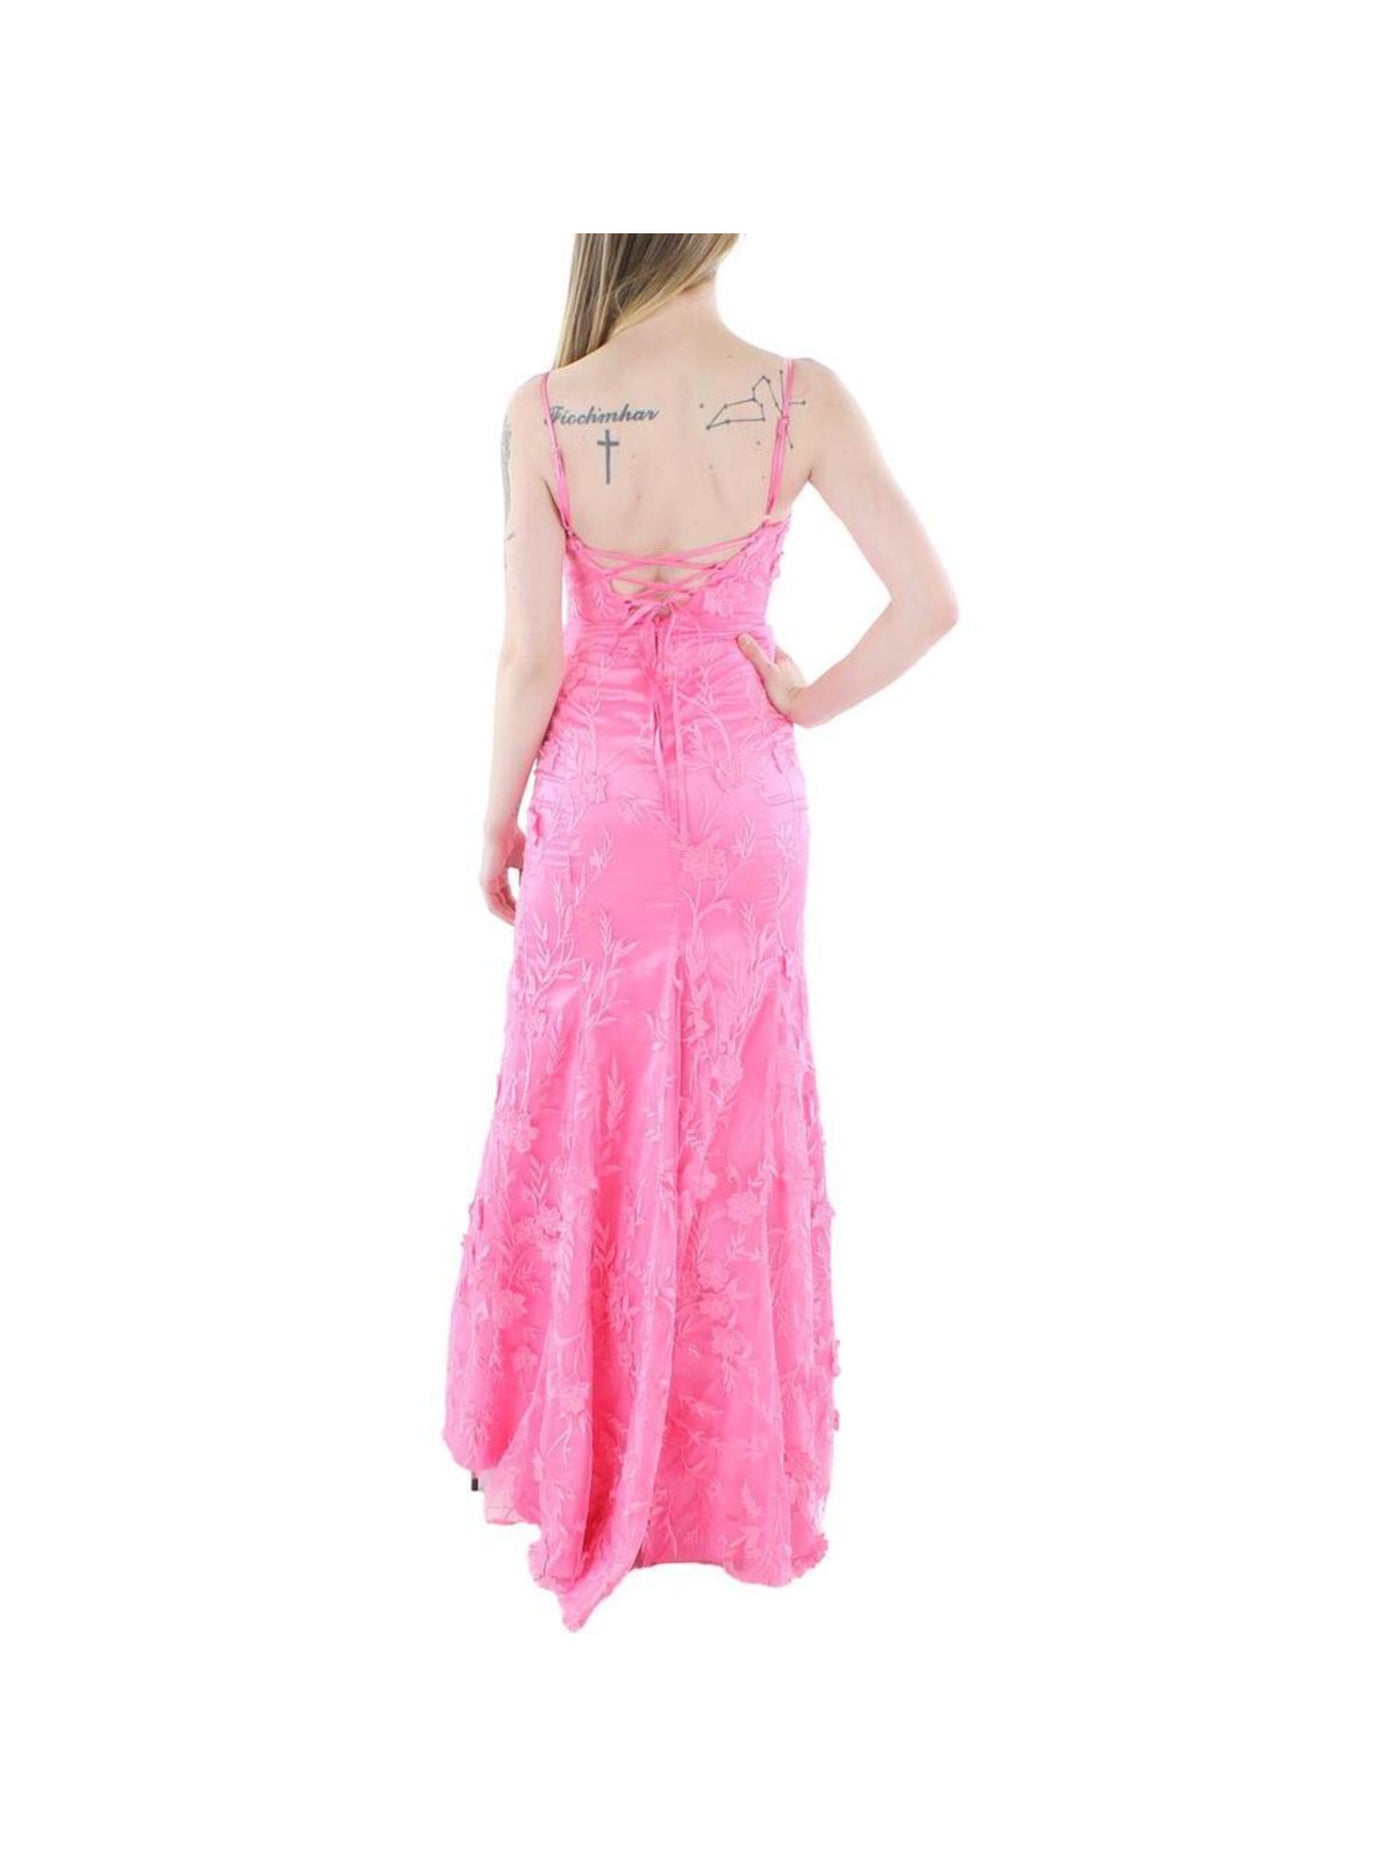 DEAR MOON Womens Pink Zippered Slitted Lace-up Back Lined Spaghetti Strap Scoop Neck Full-Length Evening Gown Dress Juniors 1